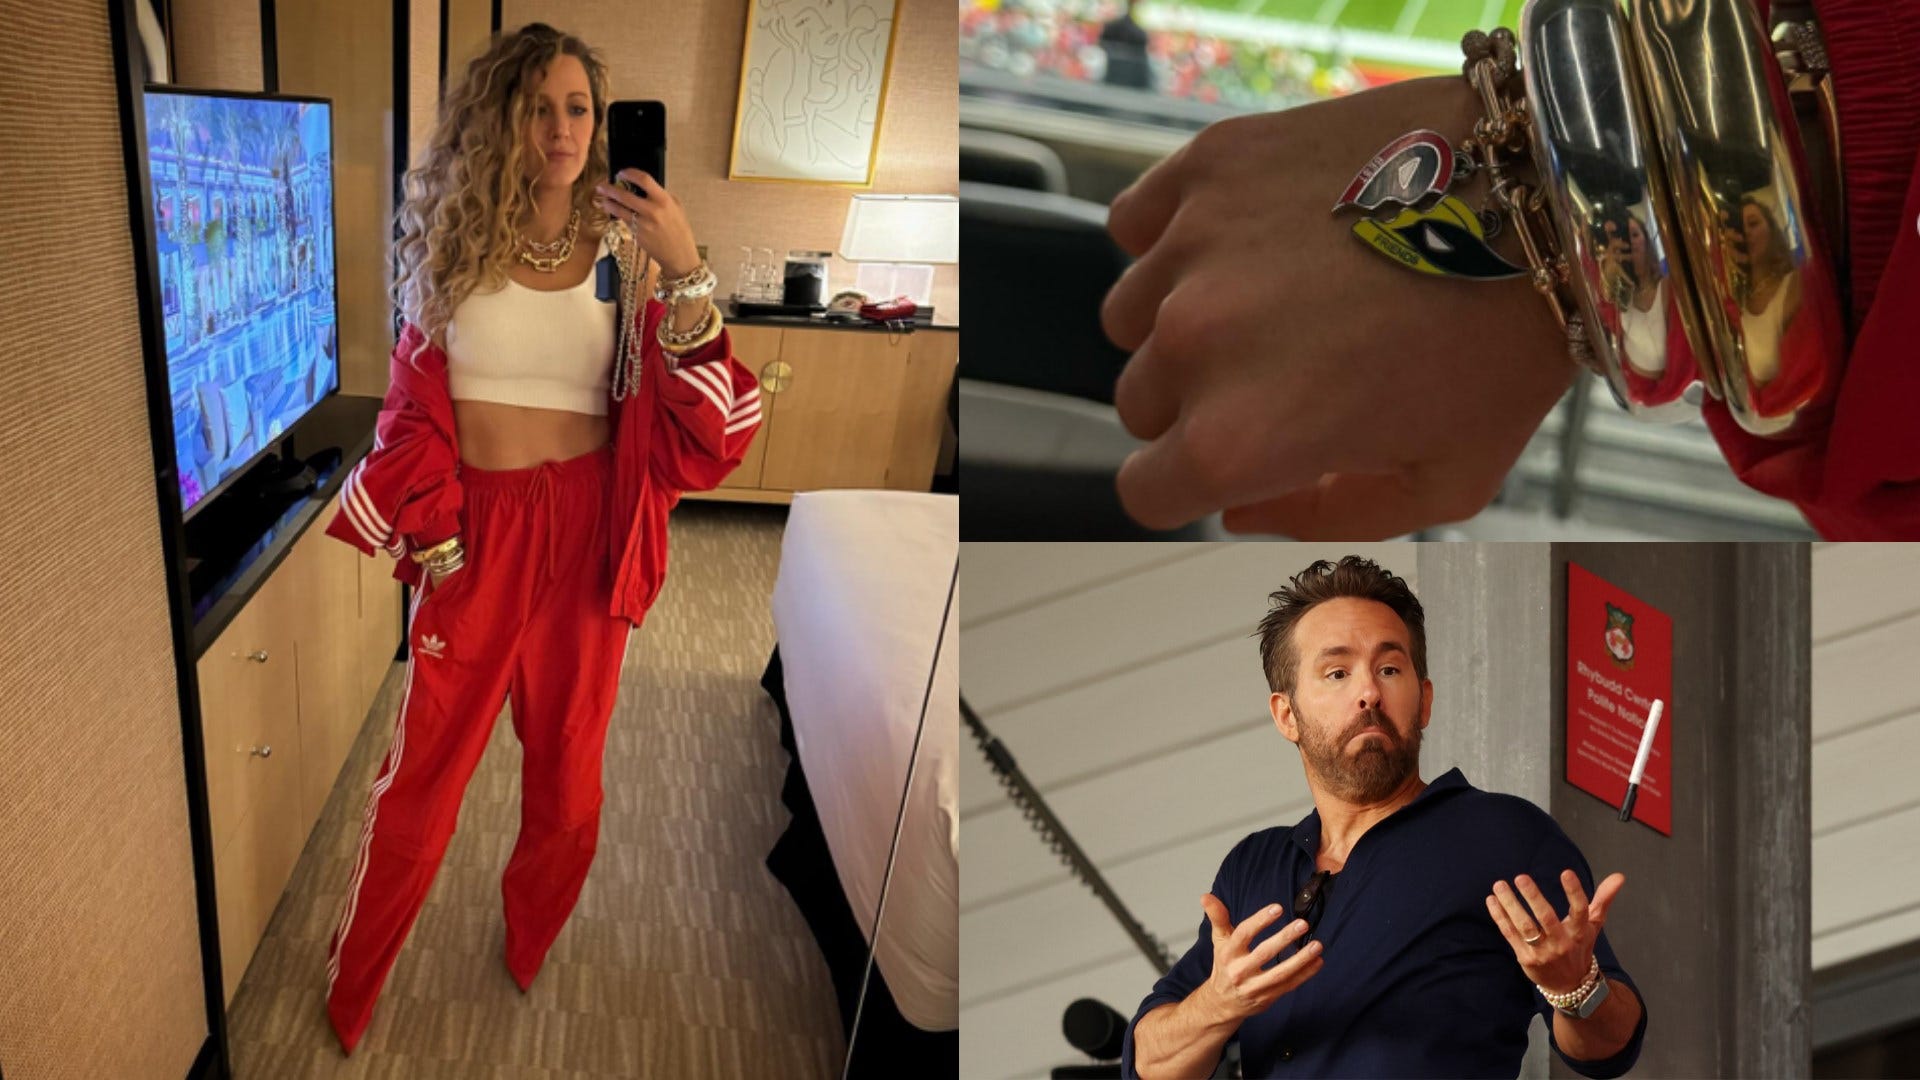 'I wore pants that were shoes' - Blake Lively reflects on wild Super Bowl antics alongside Taylor Swift after leaving her & Ryan Reynolds' kids for 'first time ever' & reveals meaning behind Deadpool bracelet from Wrexham co-owner